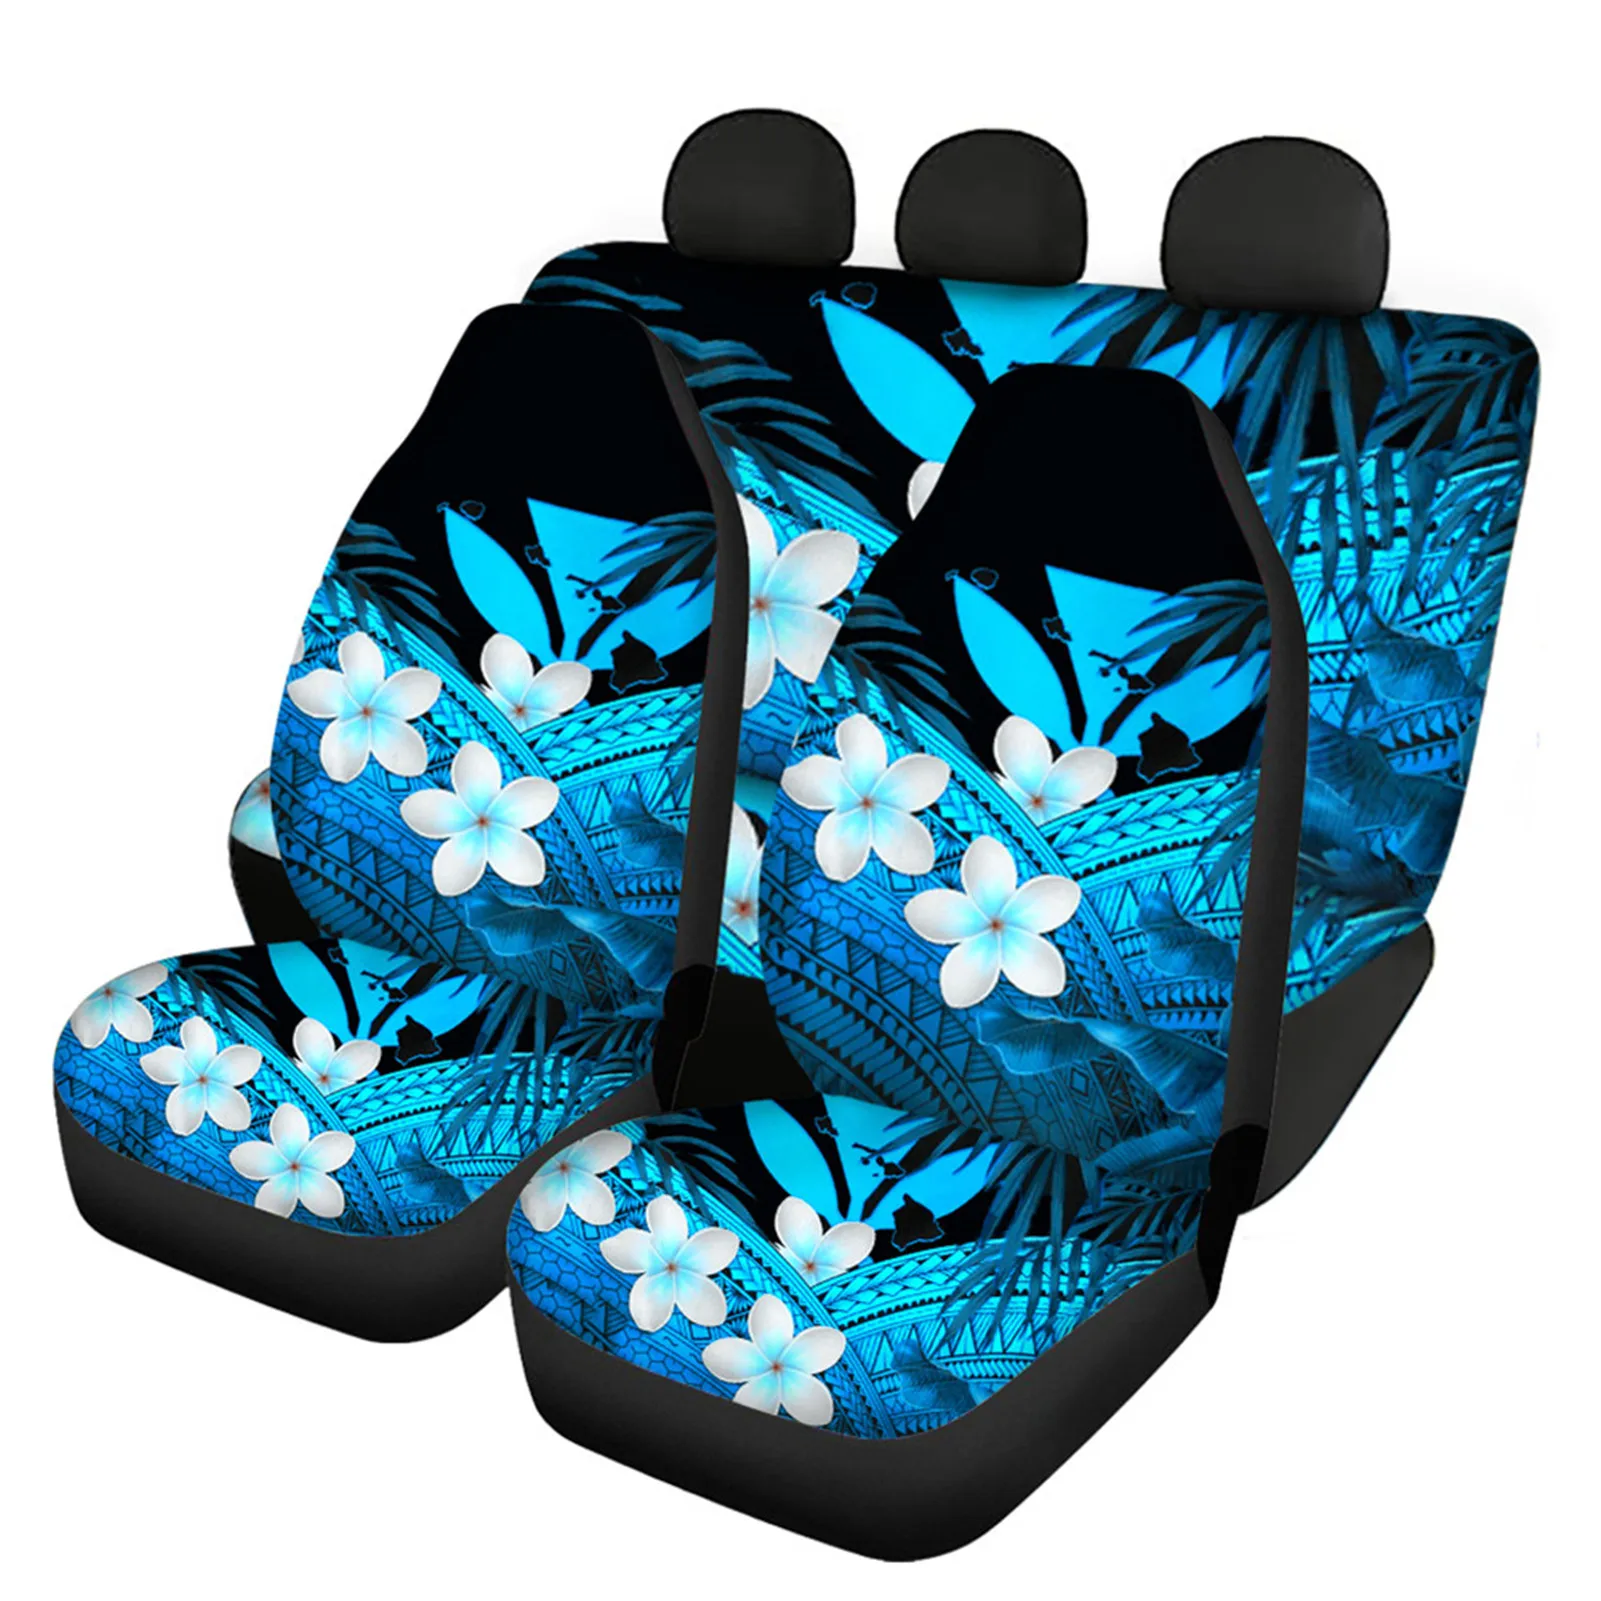 

HUGSIDEA Hawaii Car Accessories Seat Cushion Case for Front and Rear Fit Universal Auto Sedan Suv Plumeria Protector for Women